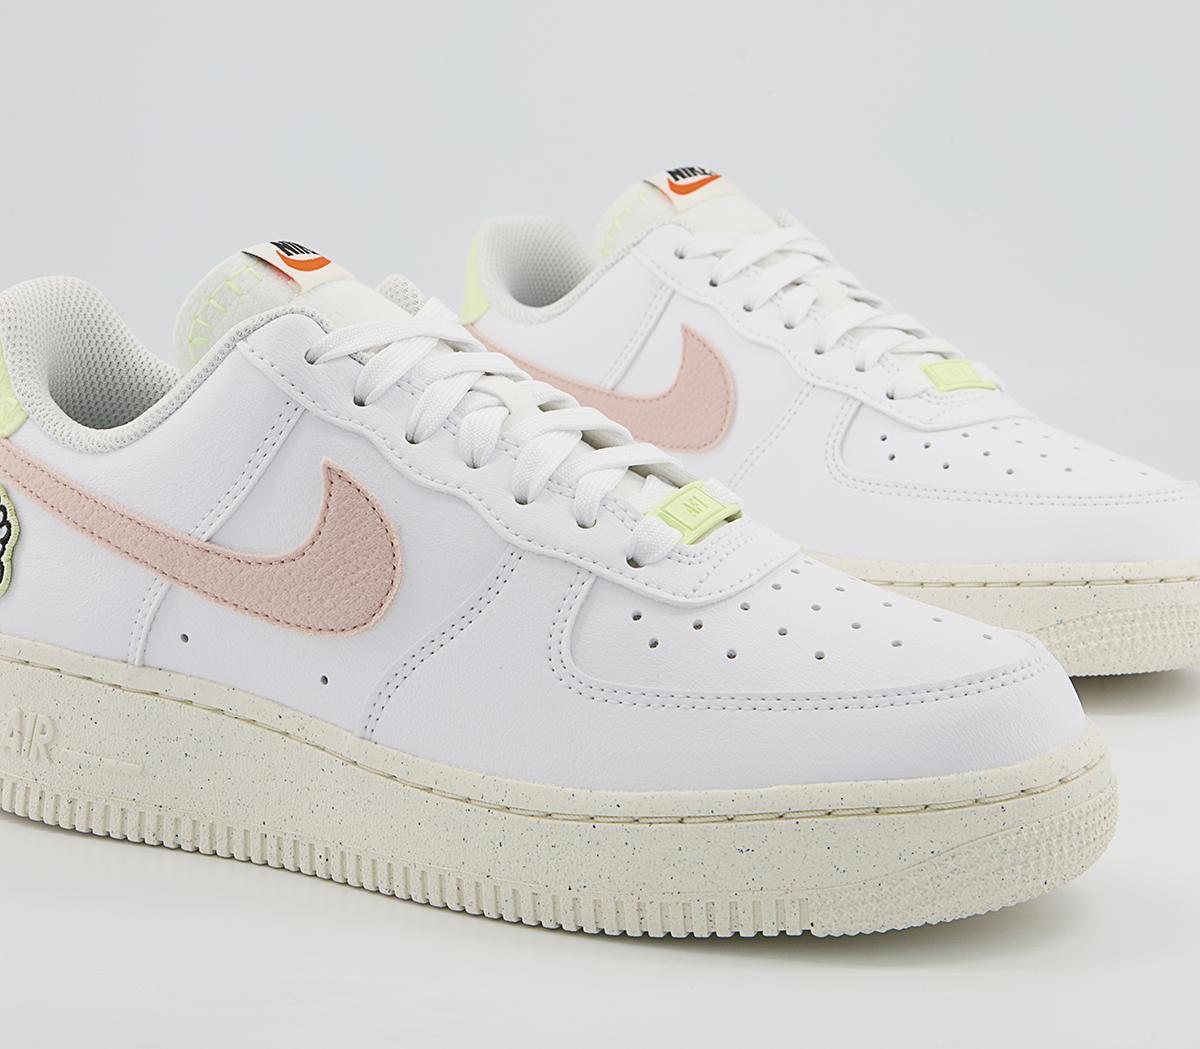 Nike Air Force 1 07 Trainers White Pink Oxford Boarder Blue - Nike Air ...